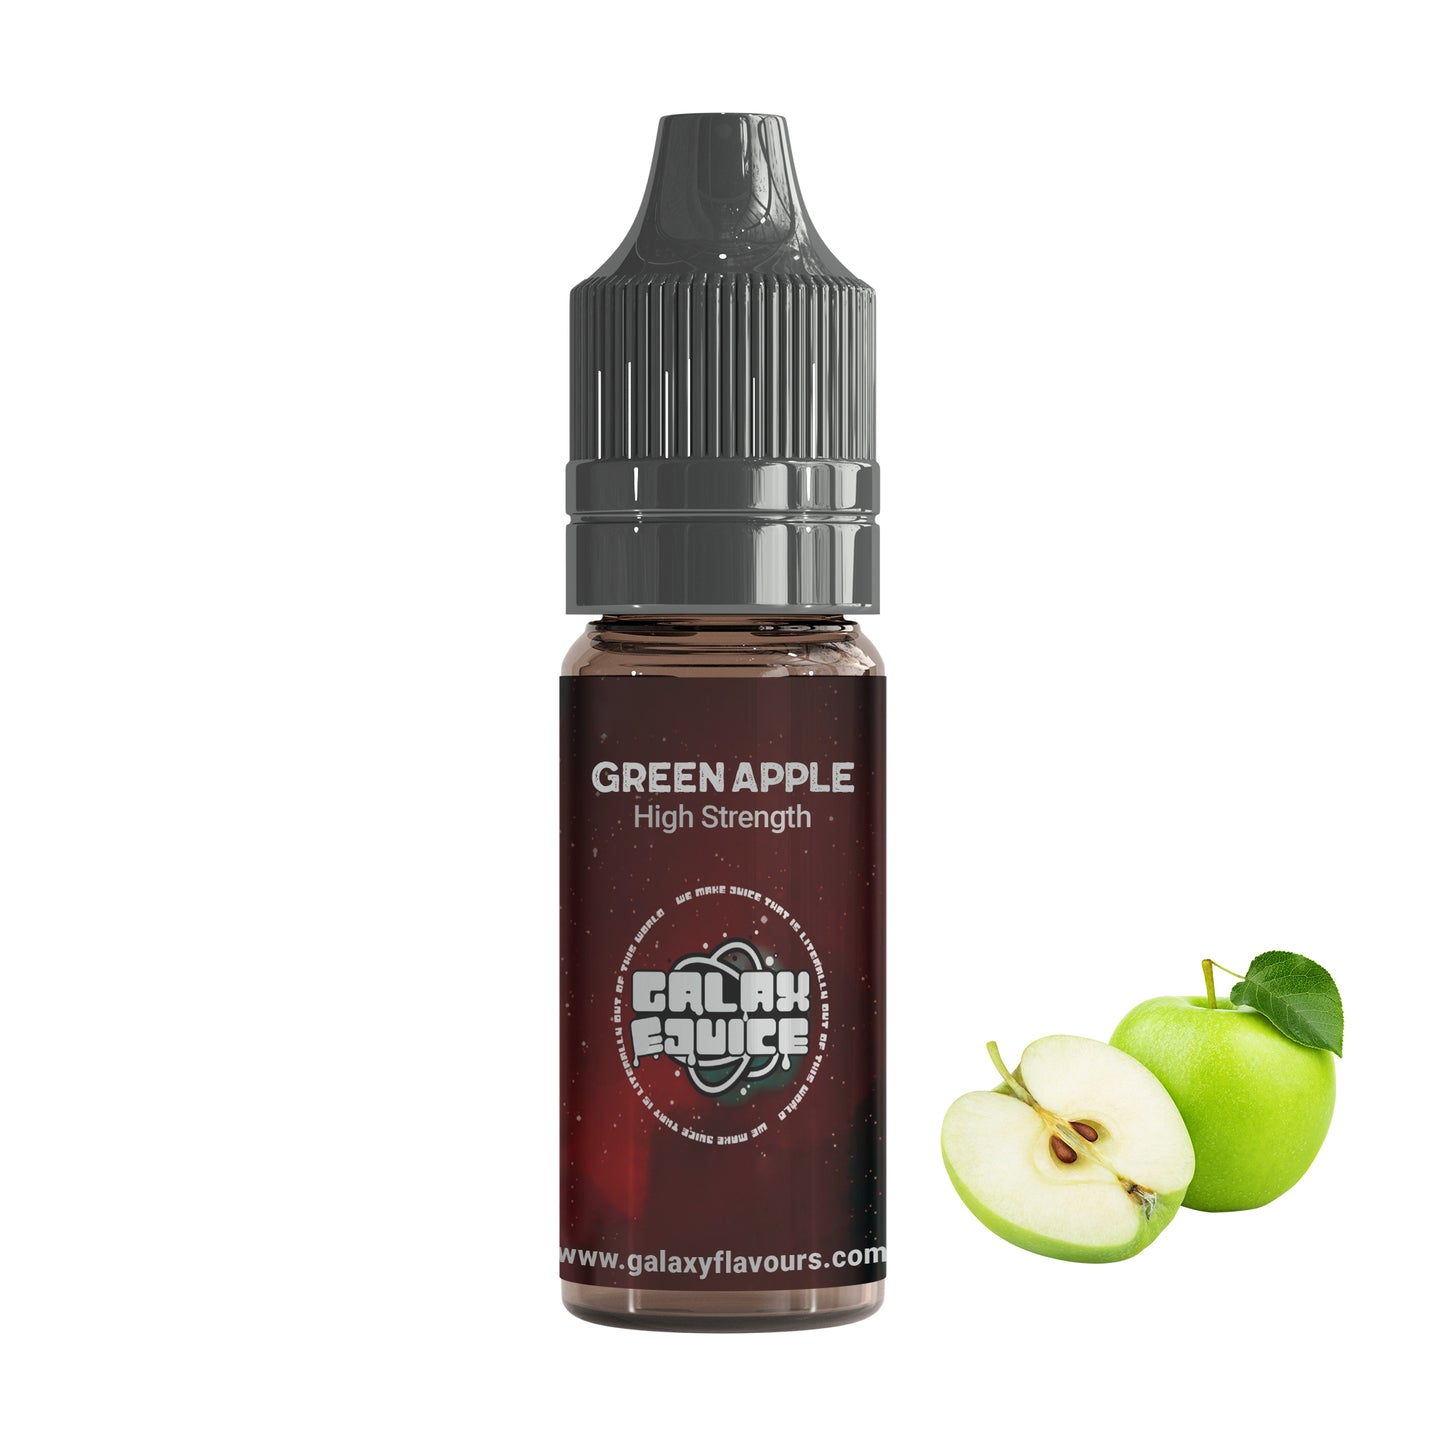 Green Apple High Strength Professional Flavouring.